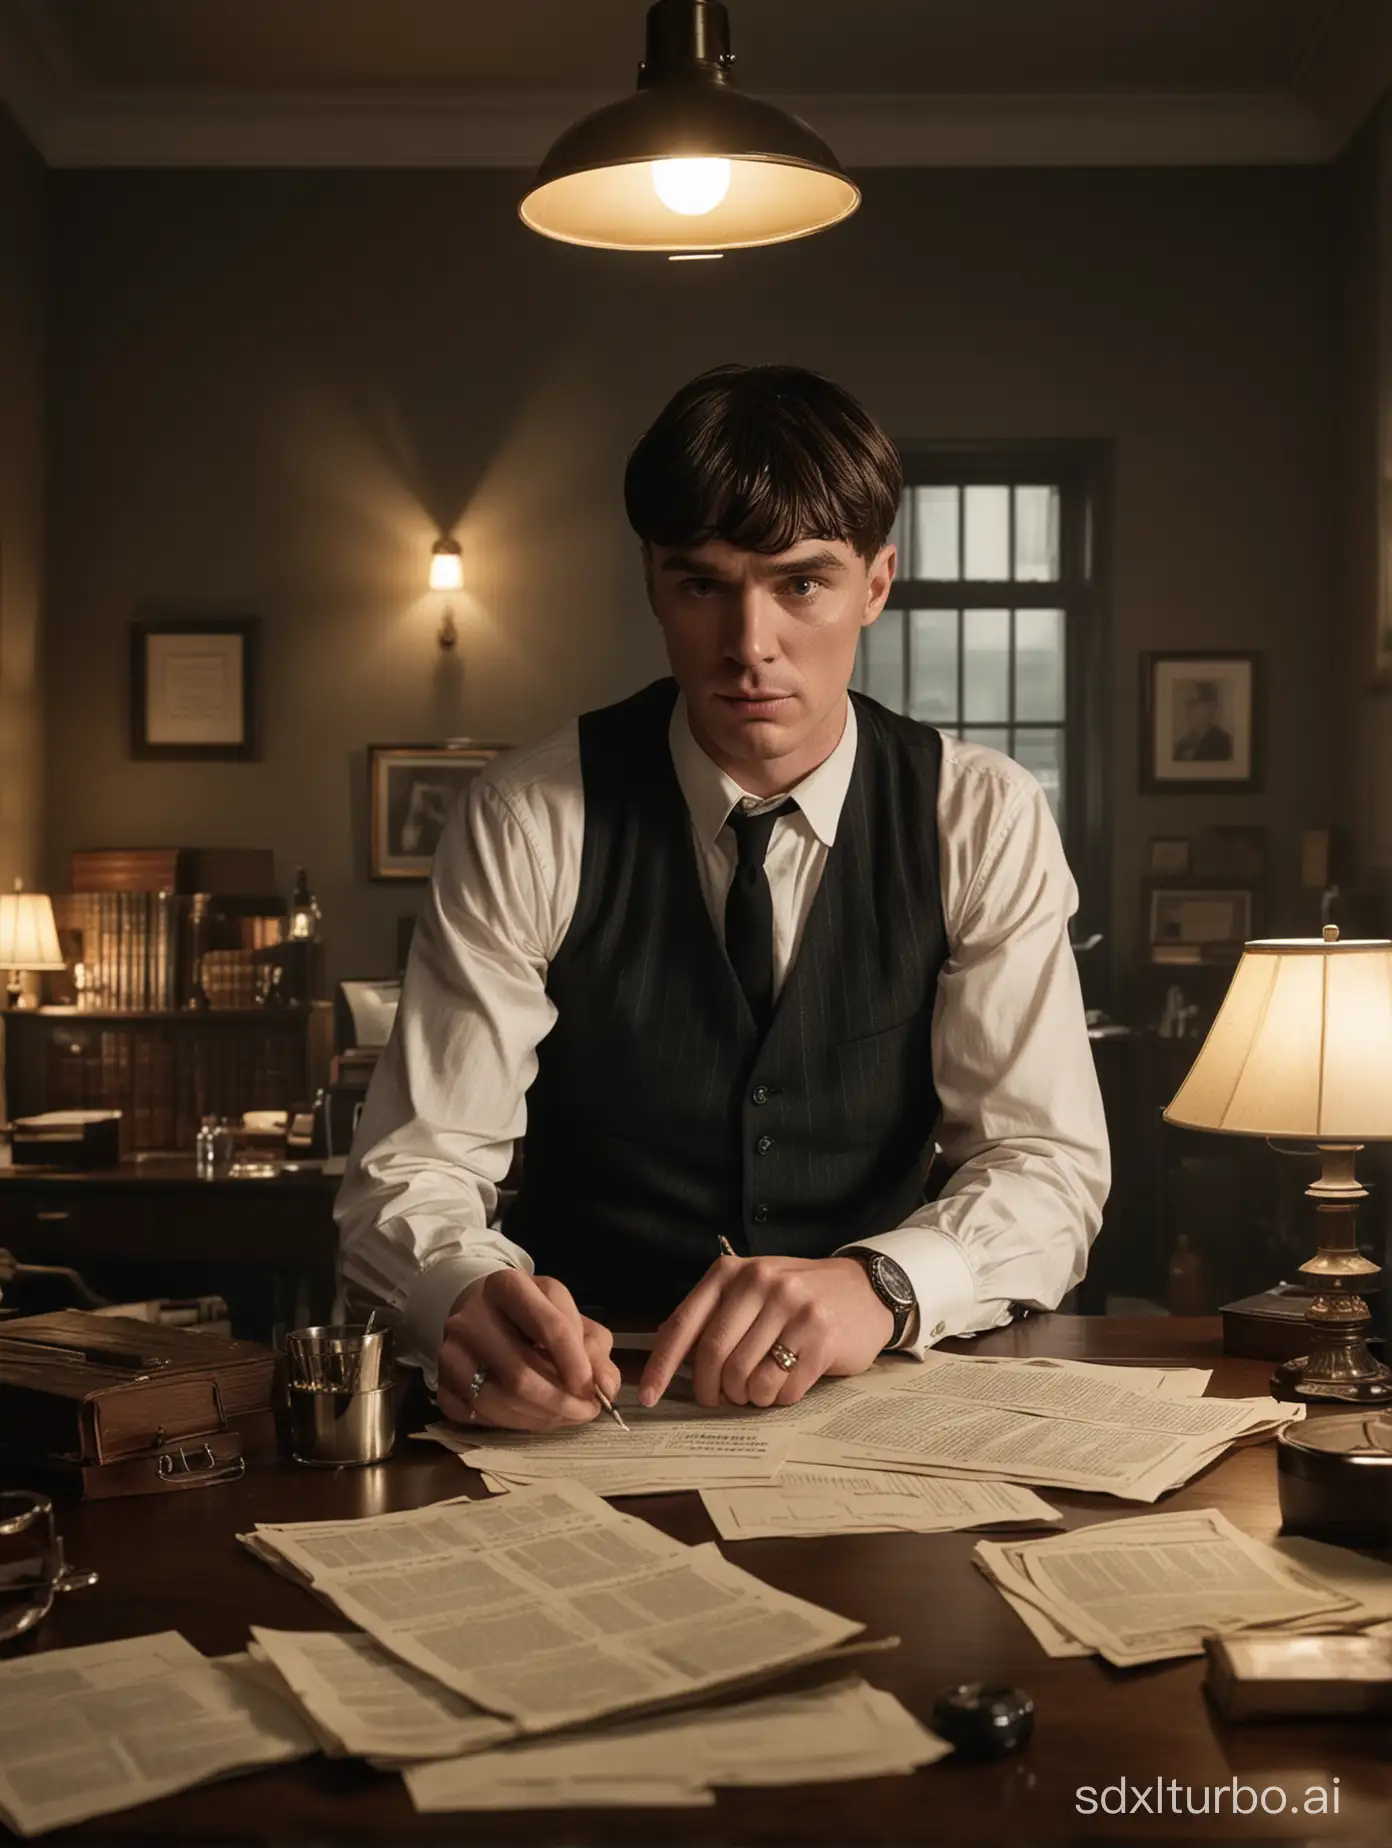 Create an image of Thomas Shelby setting in his office behind his desk with papers unfolded busy working on his multi-million british pound business wirh 100k stacks around him at night. The room is dimly lit by his Lamp beside him. Thomas is looking straight into the camera, his face illuminated, showing determination and focus. To his side, there's his gun that he always carry with him, ready to be used. The room's décor is hus office from his series Peaky Blinders, with visible pictures of him in the background. The overall ambiance of the image should convey a sense of dedication, creativity, and a connection to business.